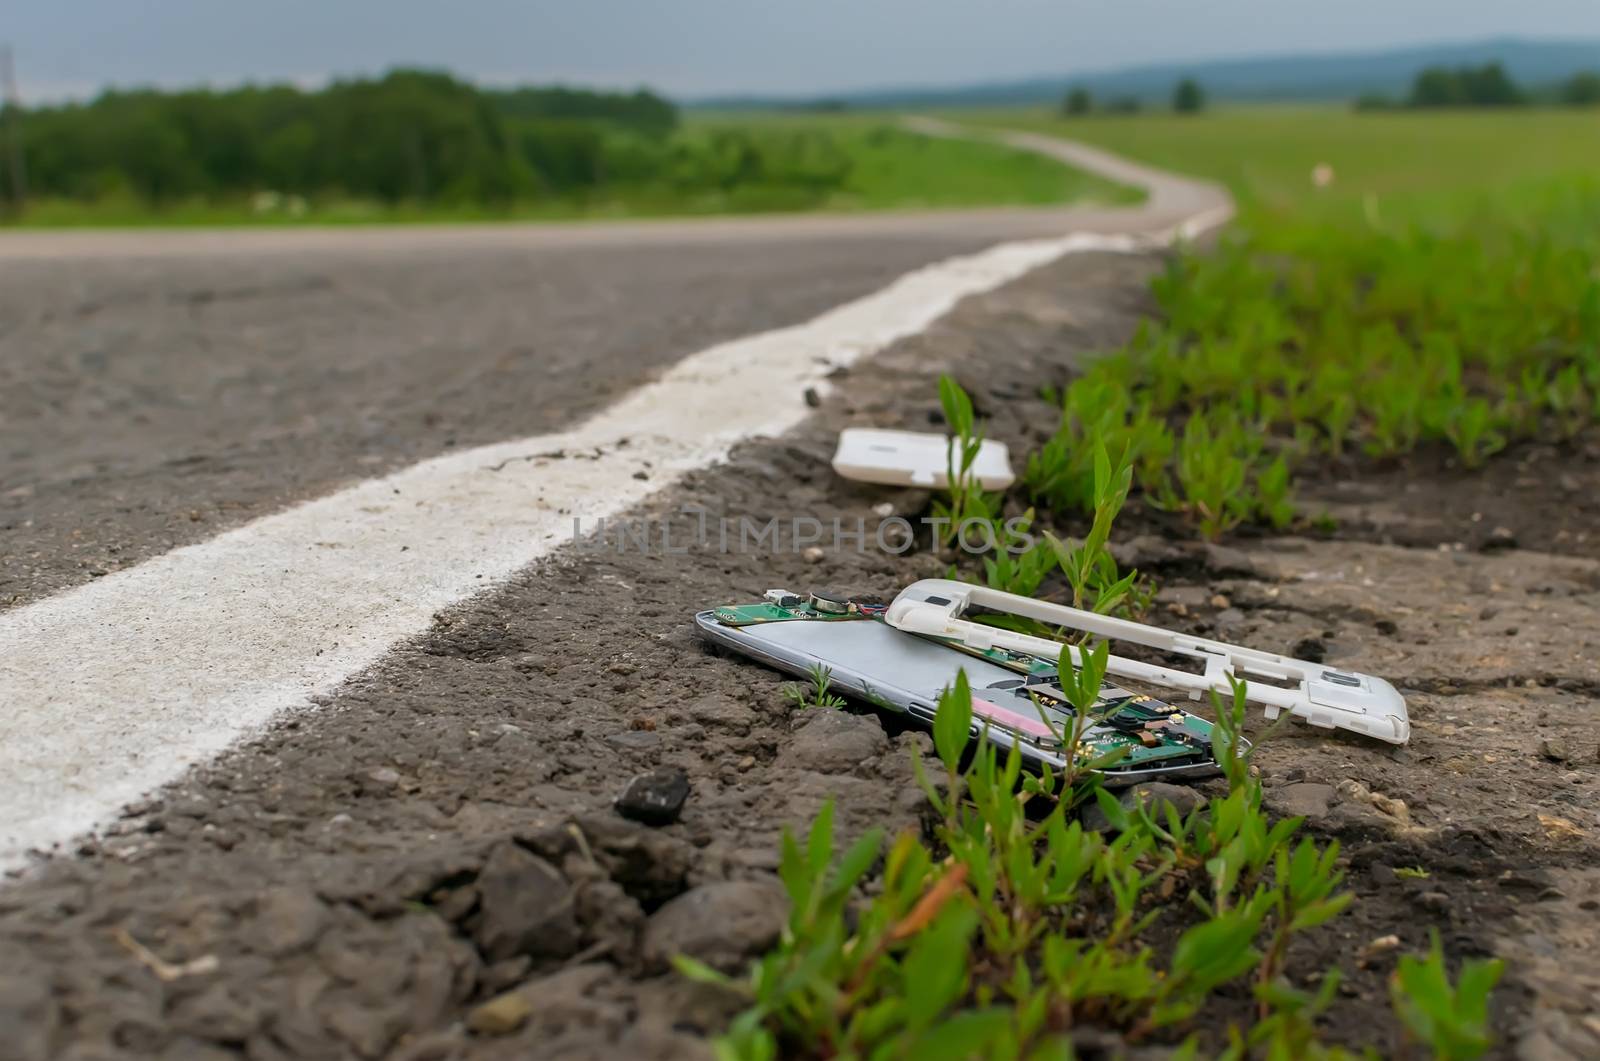 View of a mobile phone lying on the asphalt on a country road in cloudy weather